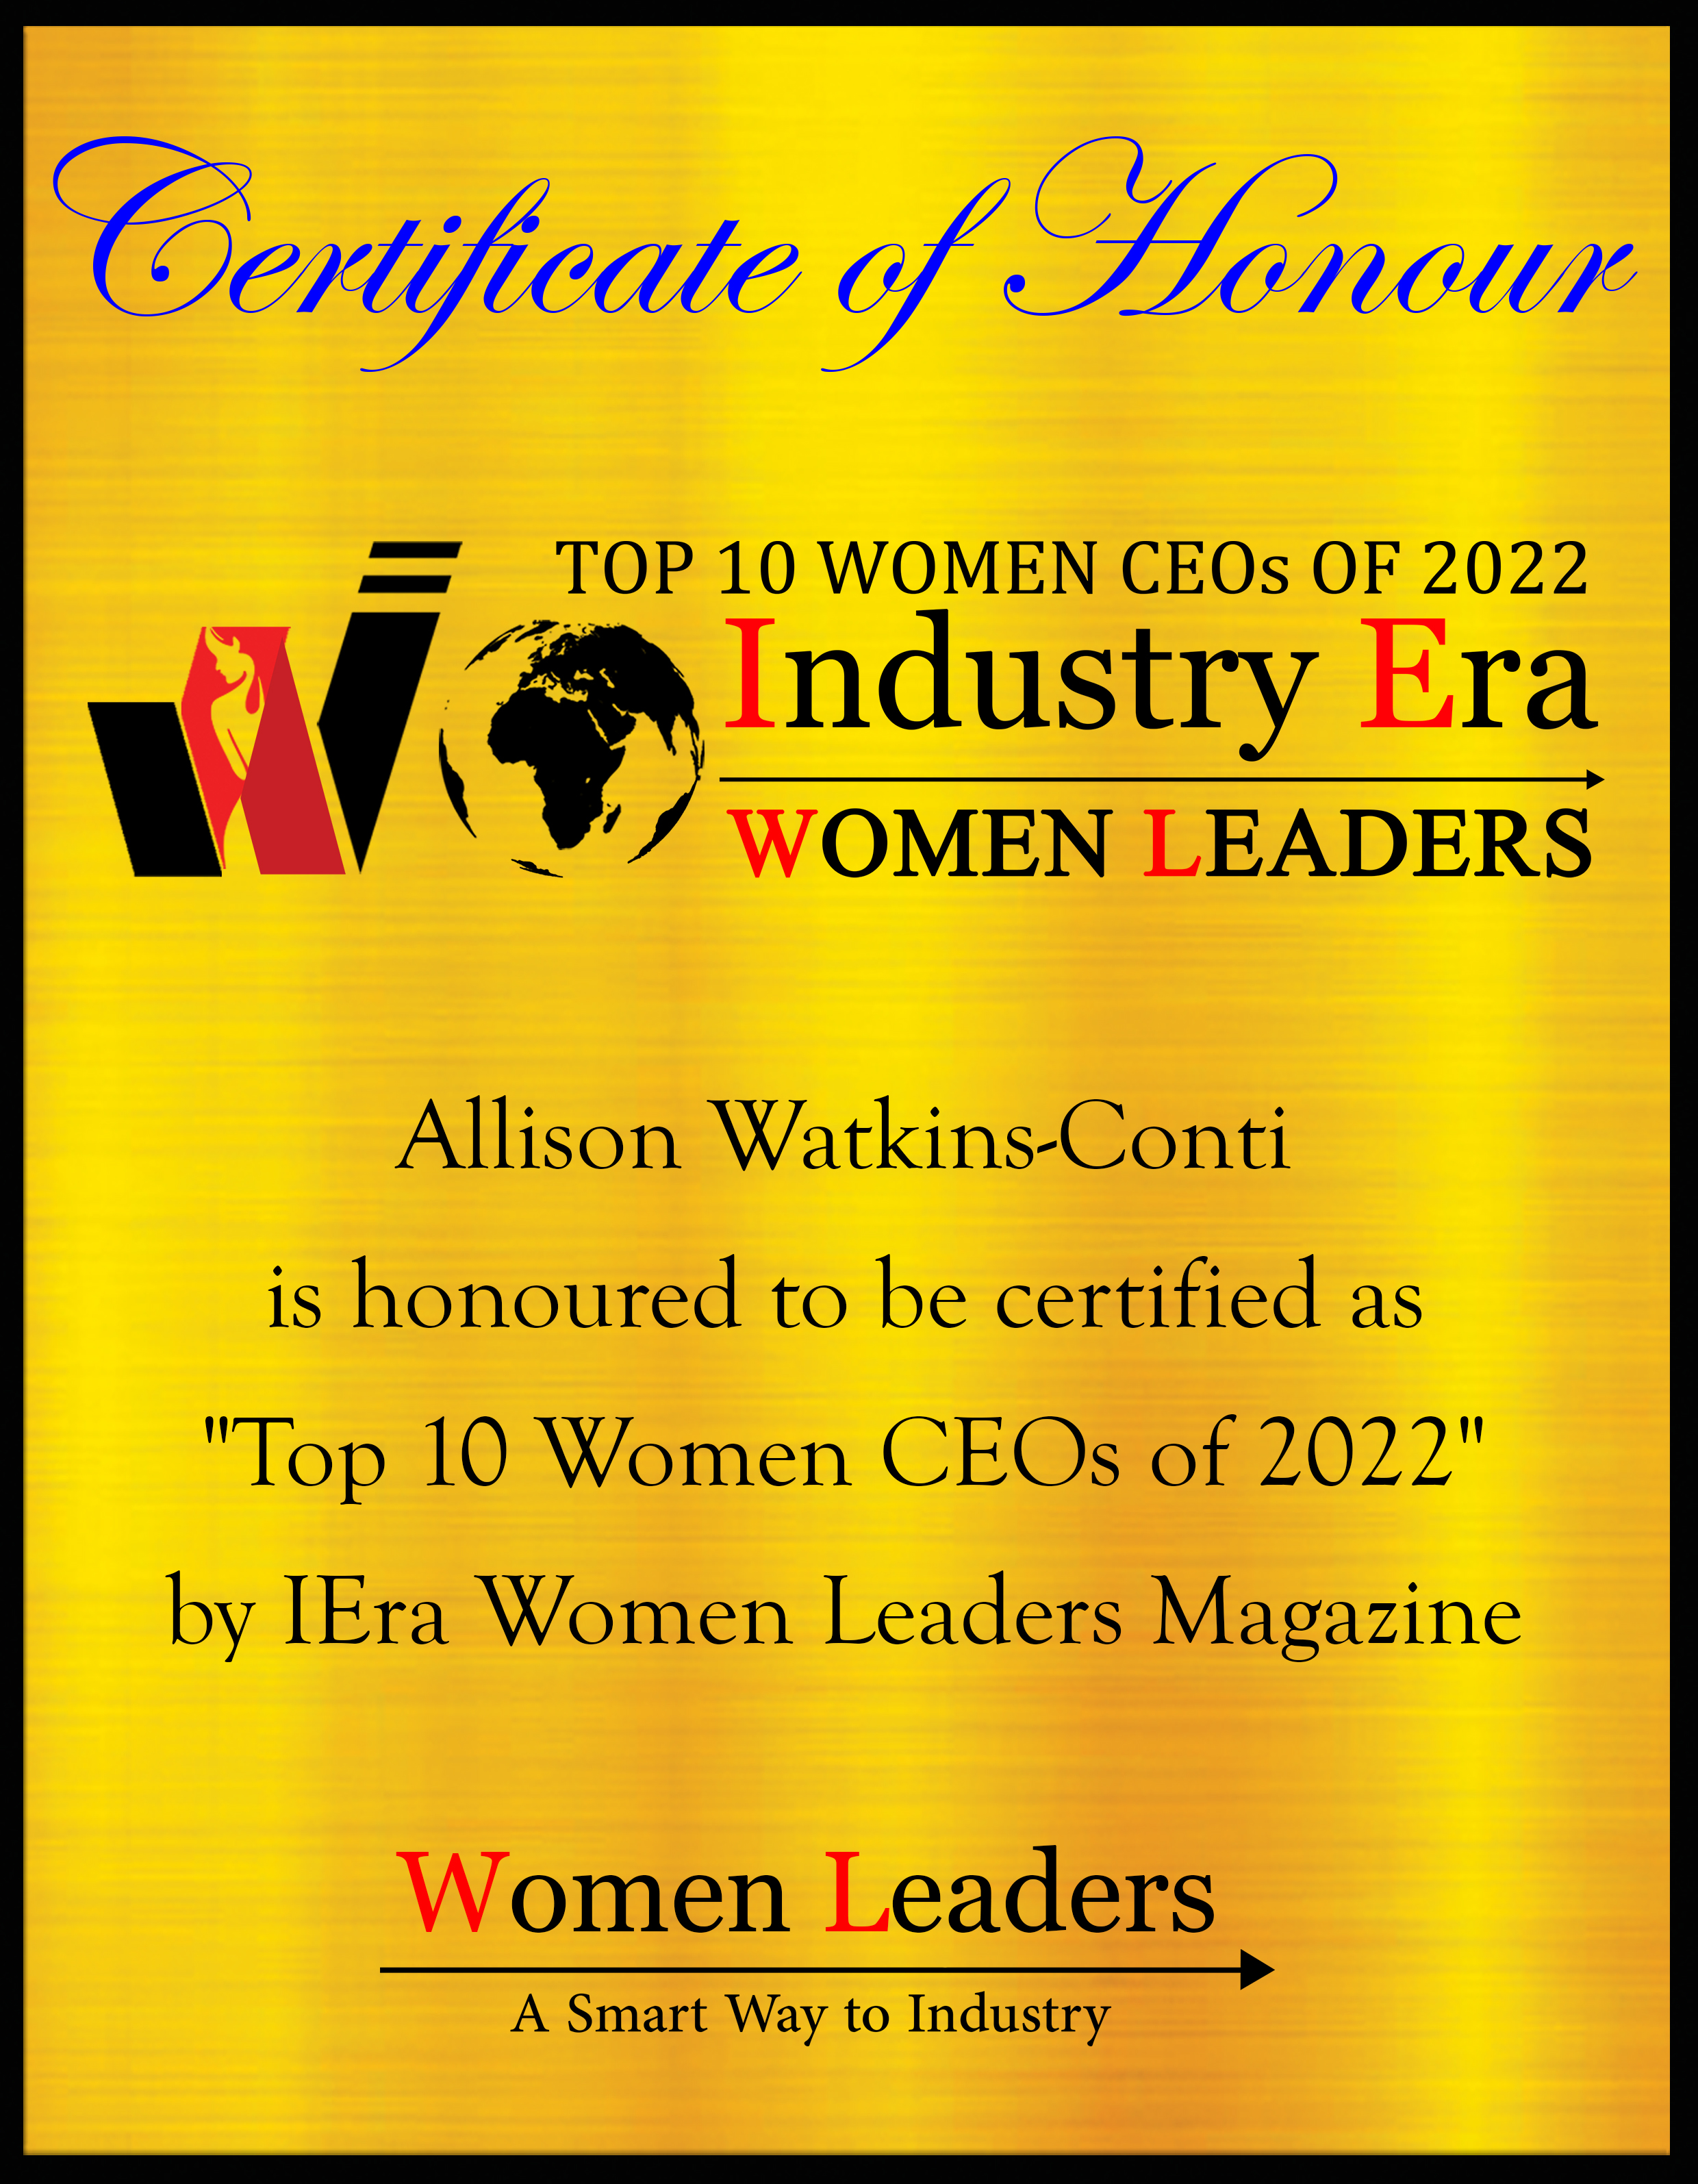 Allison Watkins-Conti, Founder & CEO of Watkins Conti Products, Top 10 Women CEOs of 2022